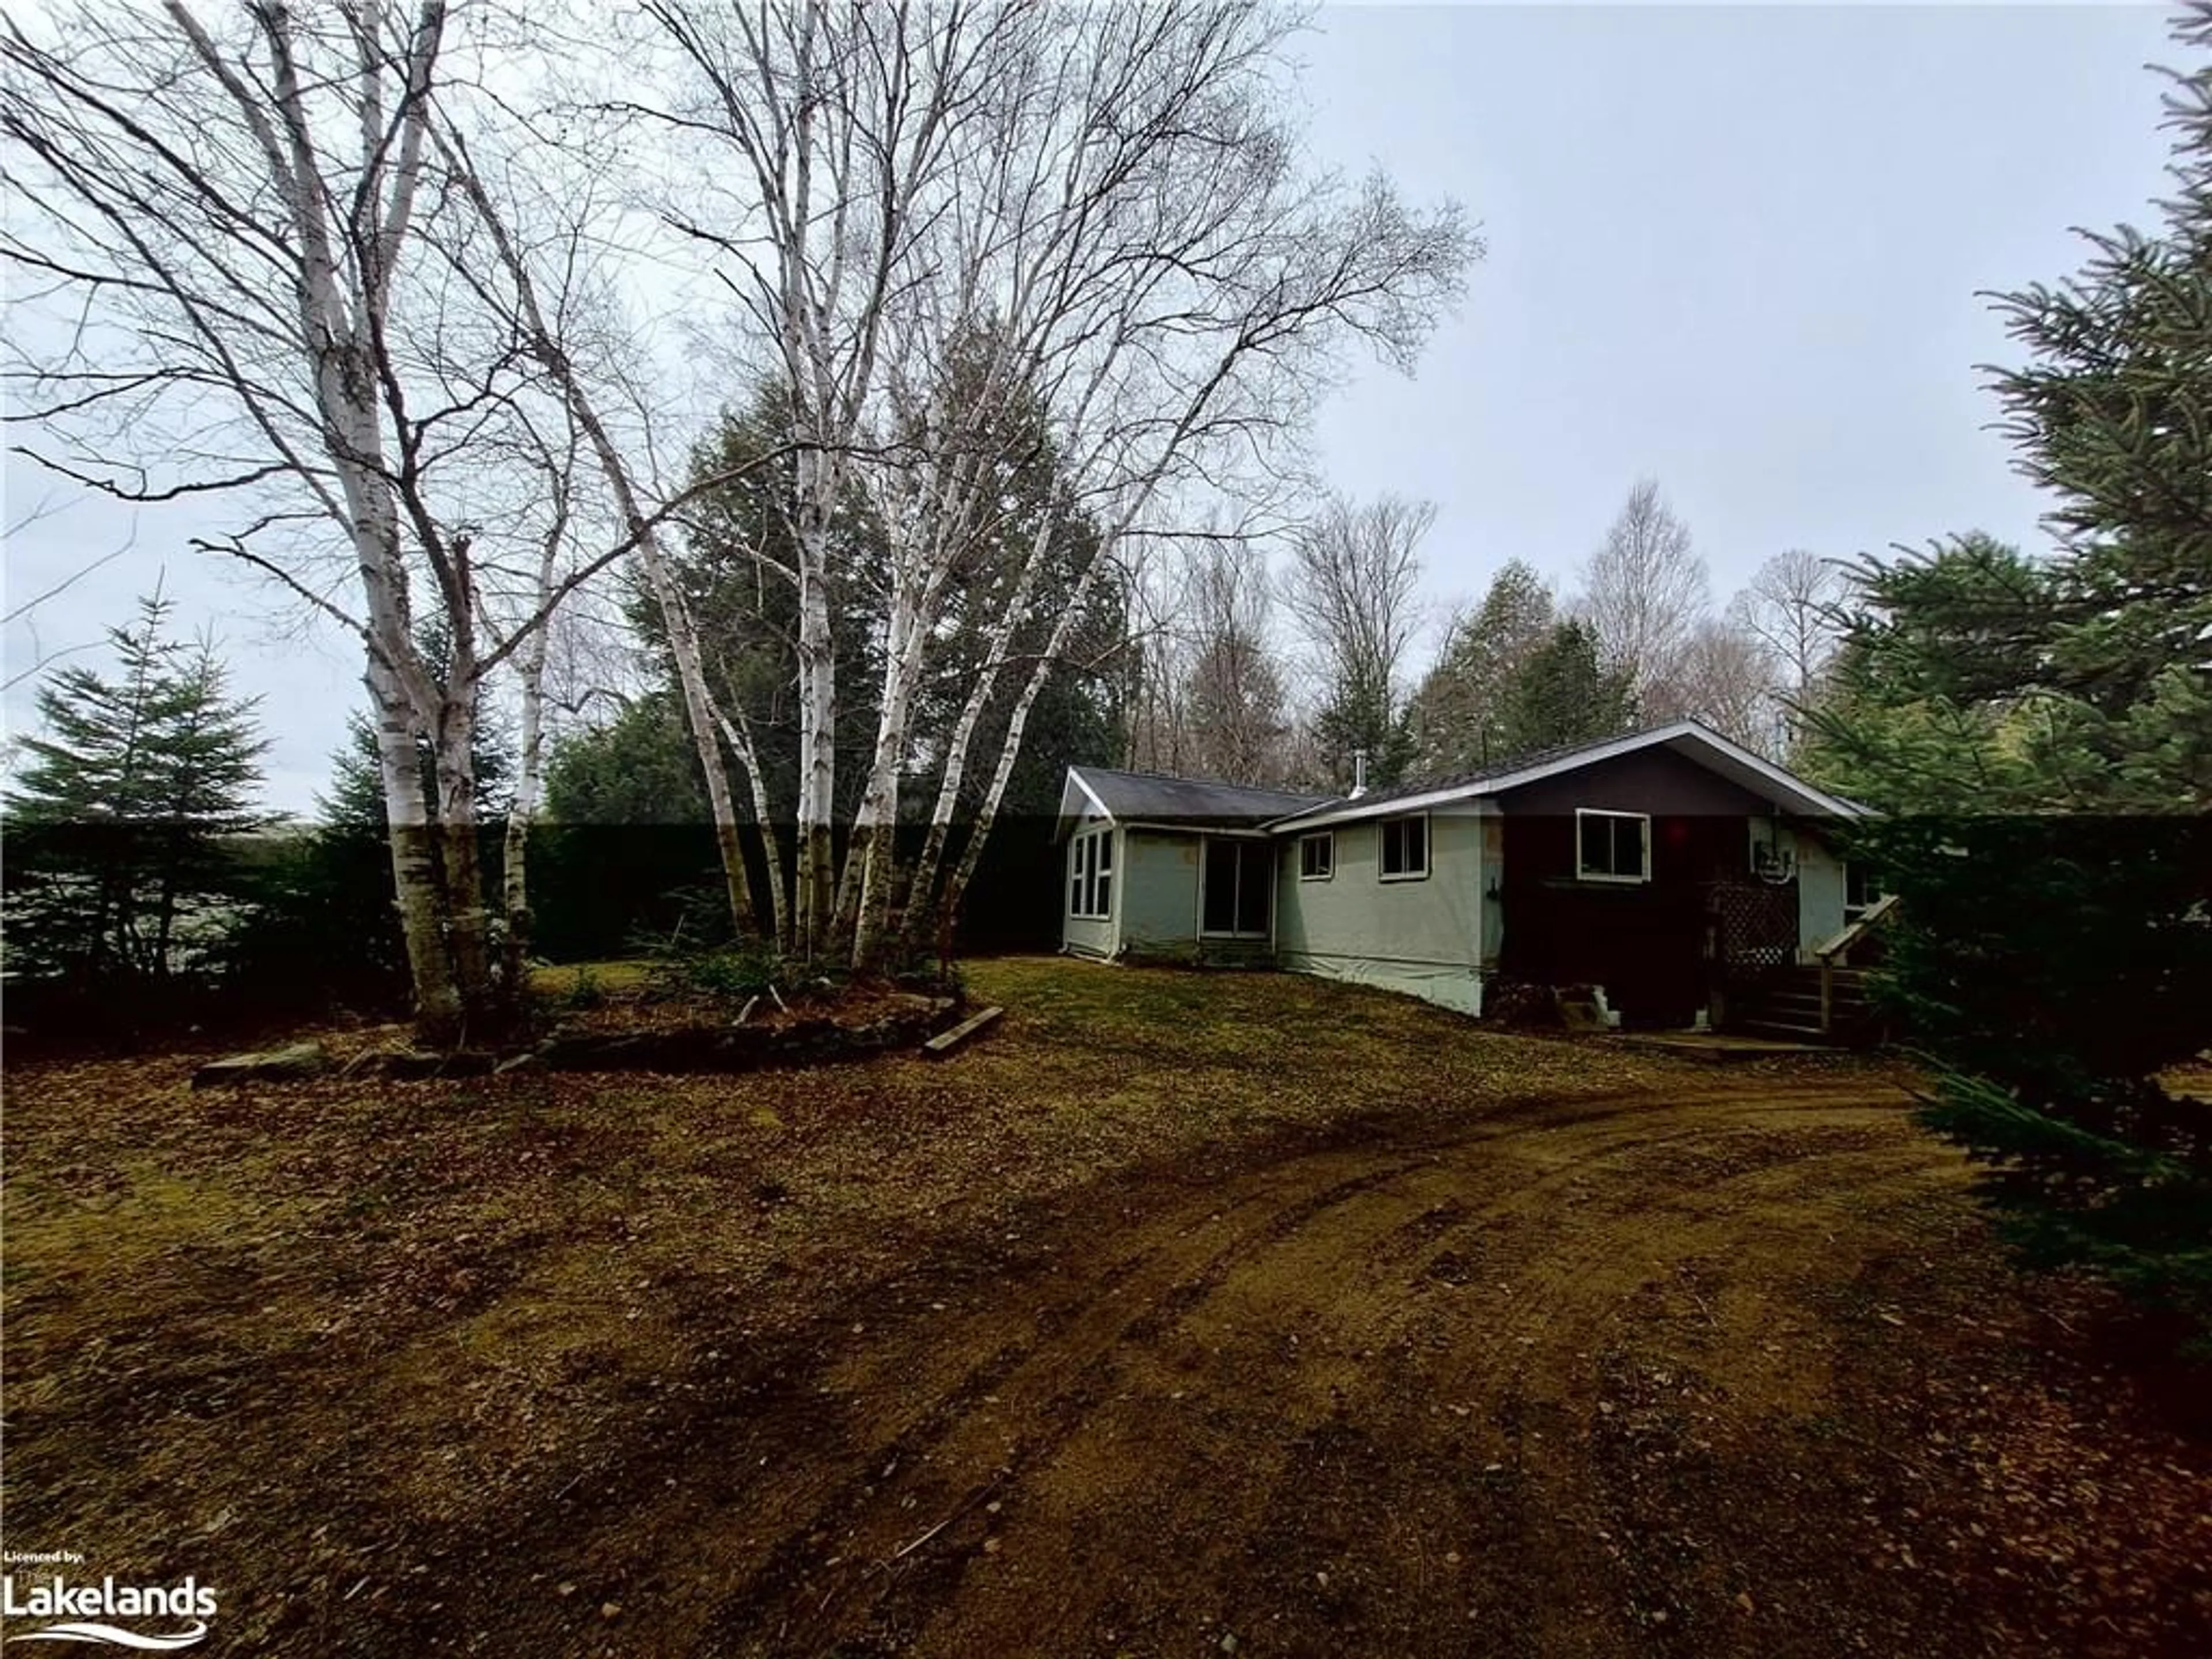 Frontside or backside of a home for 1252 Sumcot Rd, Harcourt Ontario K0L 1M1